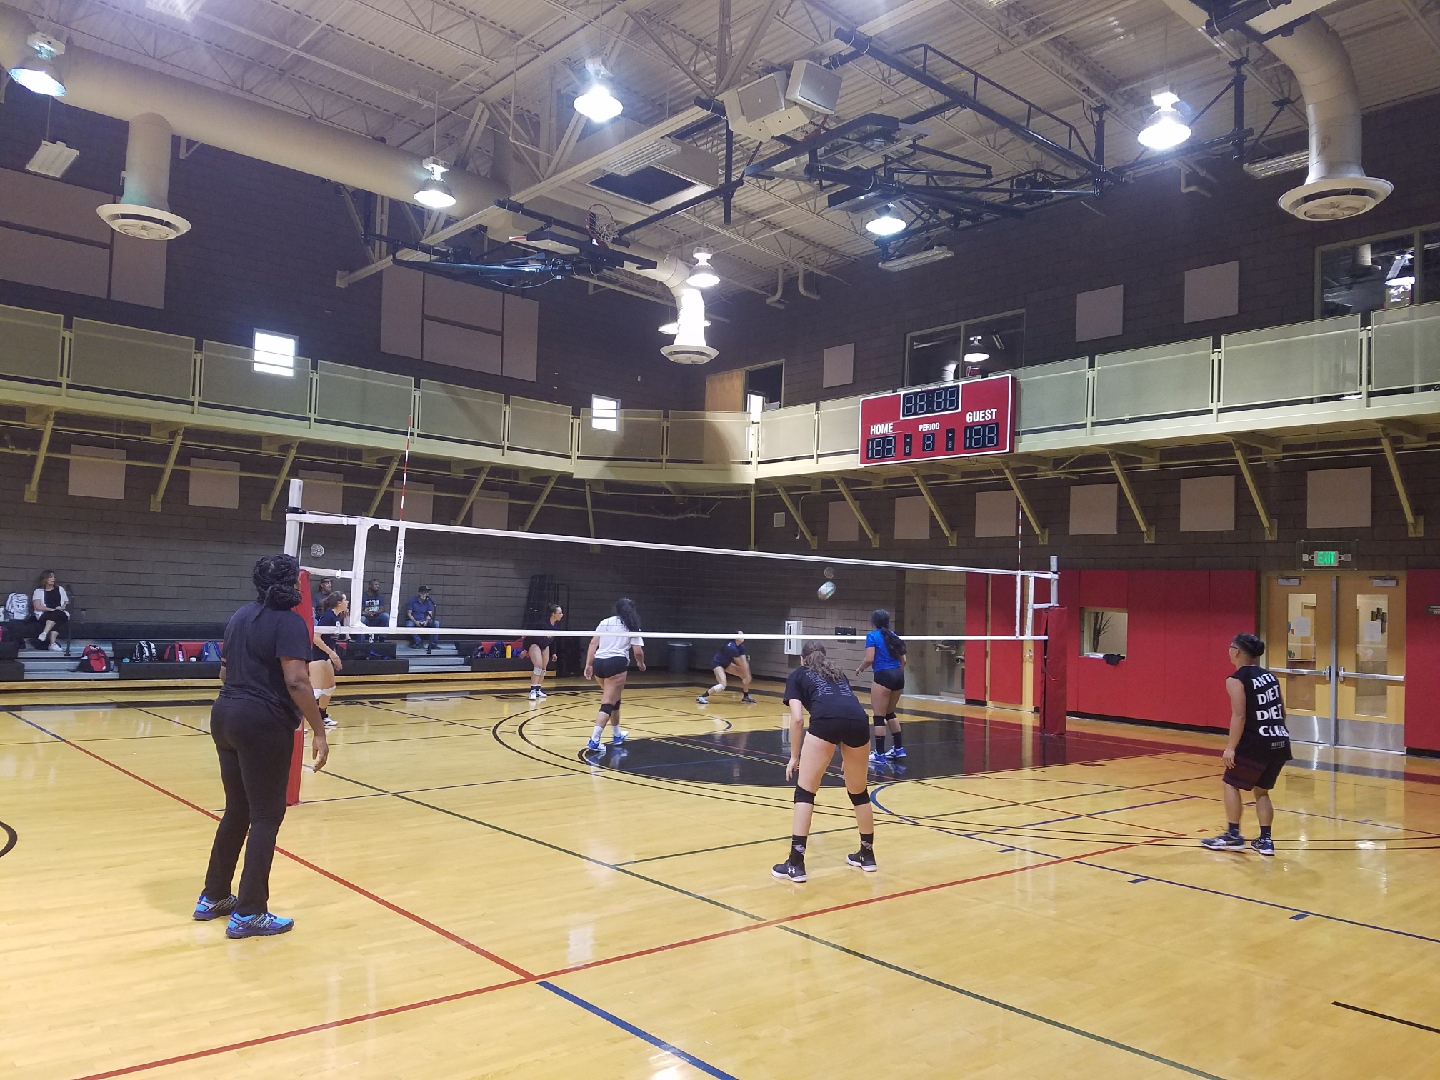 My Volleyball Motivation:
Why I Charged $5 For Vegas Volleyball Classes